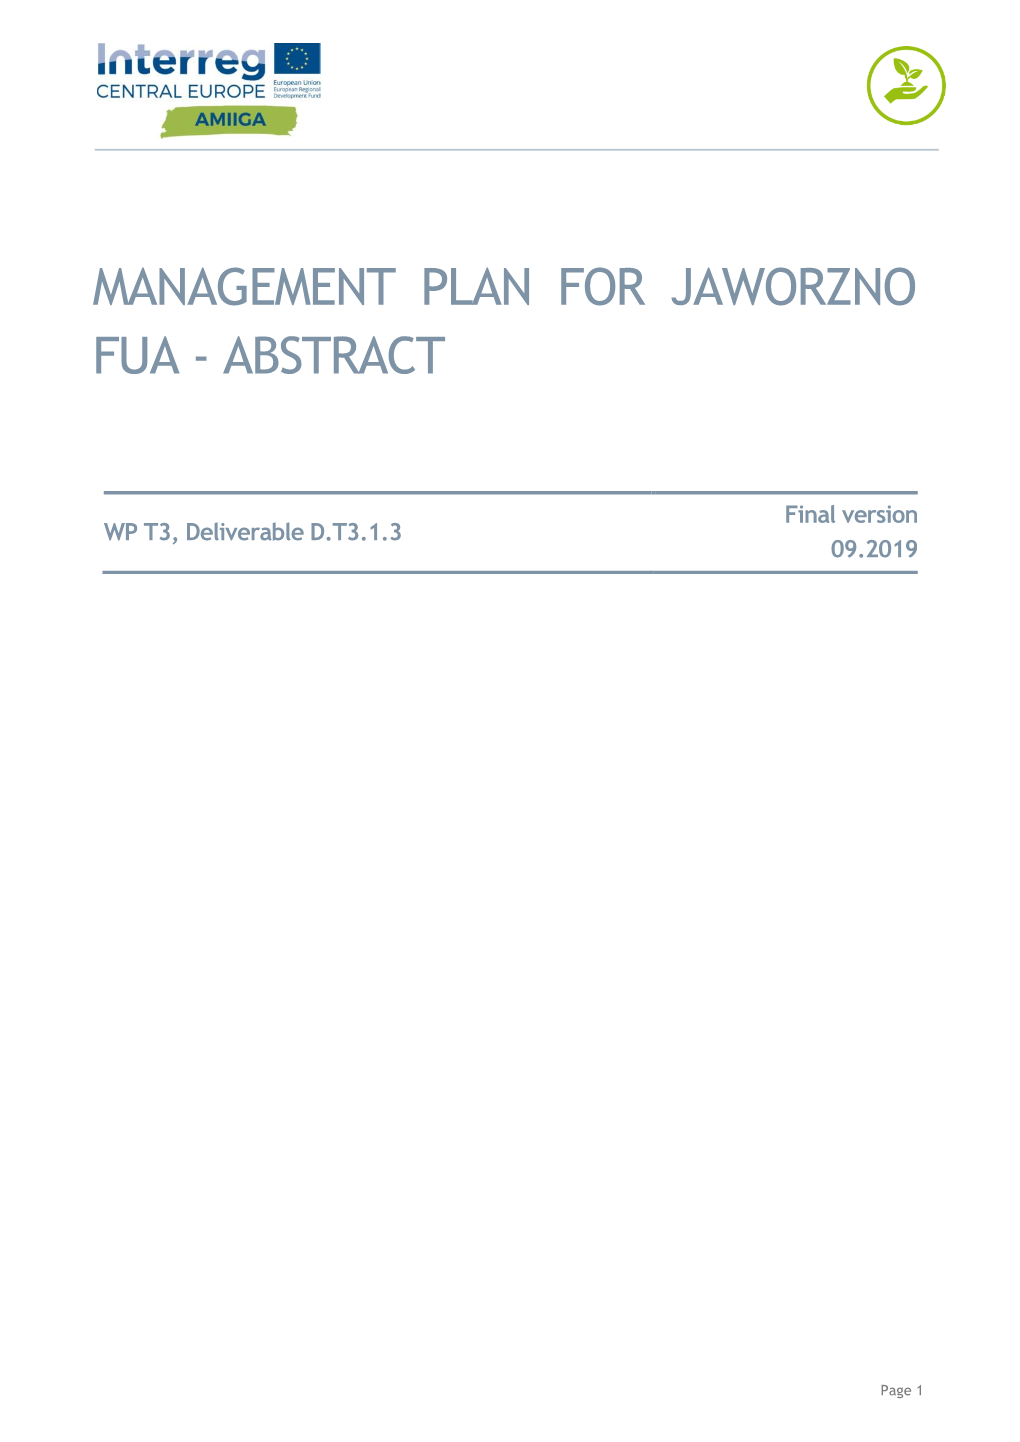 Read More About Jaworzno Management Plan